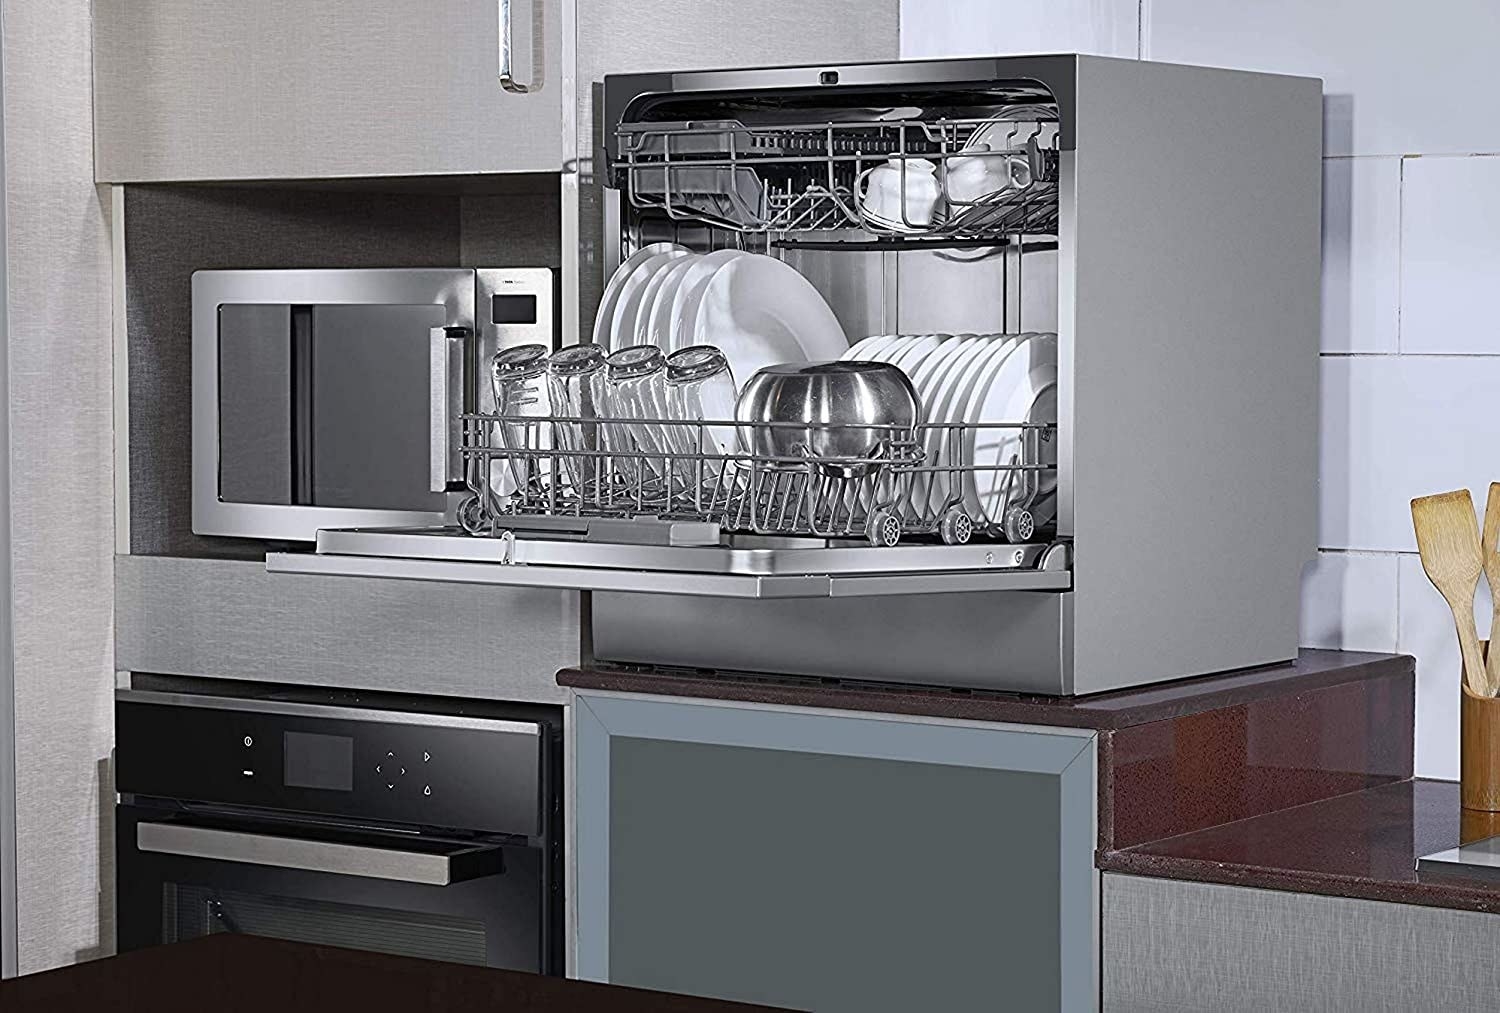 A voltas dishwasher with clean dishes inside it.